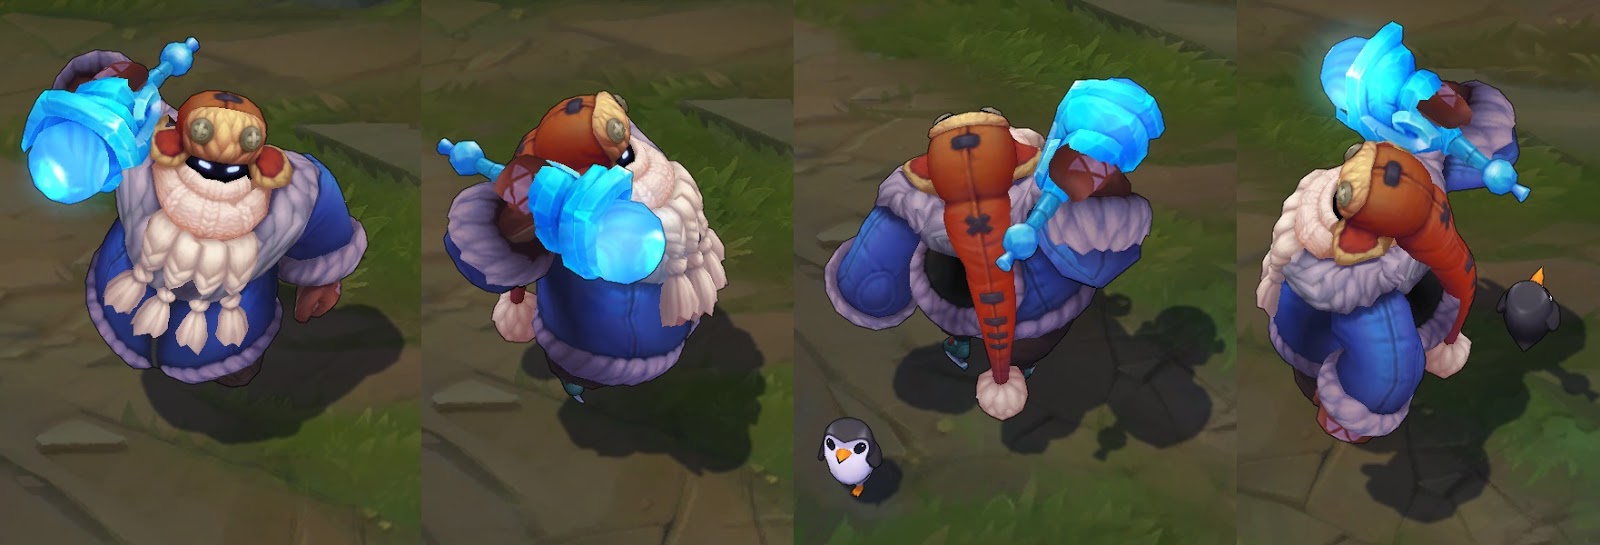 Snow Day Bard Skin for league of legends ingame picture